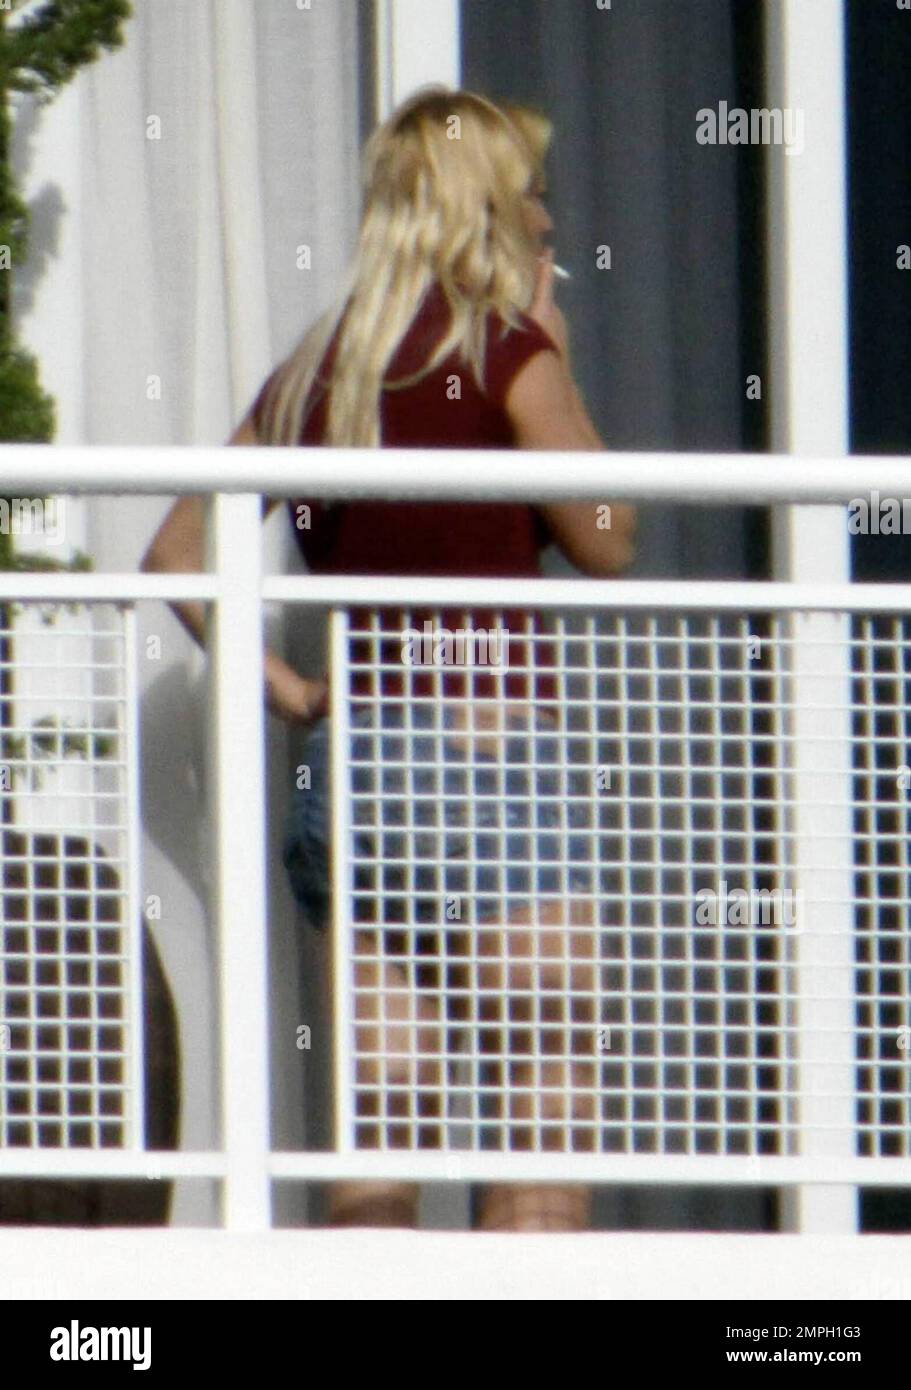 Singer Britney Spears enjoys one of several smoke breaks on the balcony of her hotel suite with her sons playing in the background. Her brother Bryan also comes out and hangs out with her, pointing out some Miami scenery. Miami, FL. 9/3/09. Stock Photo